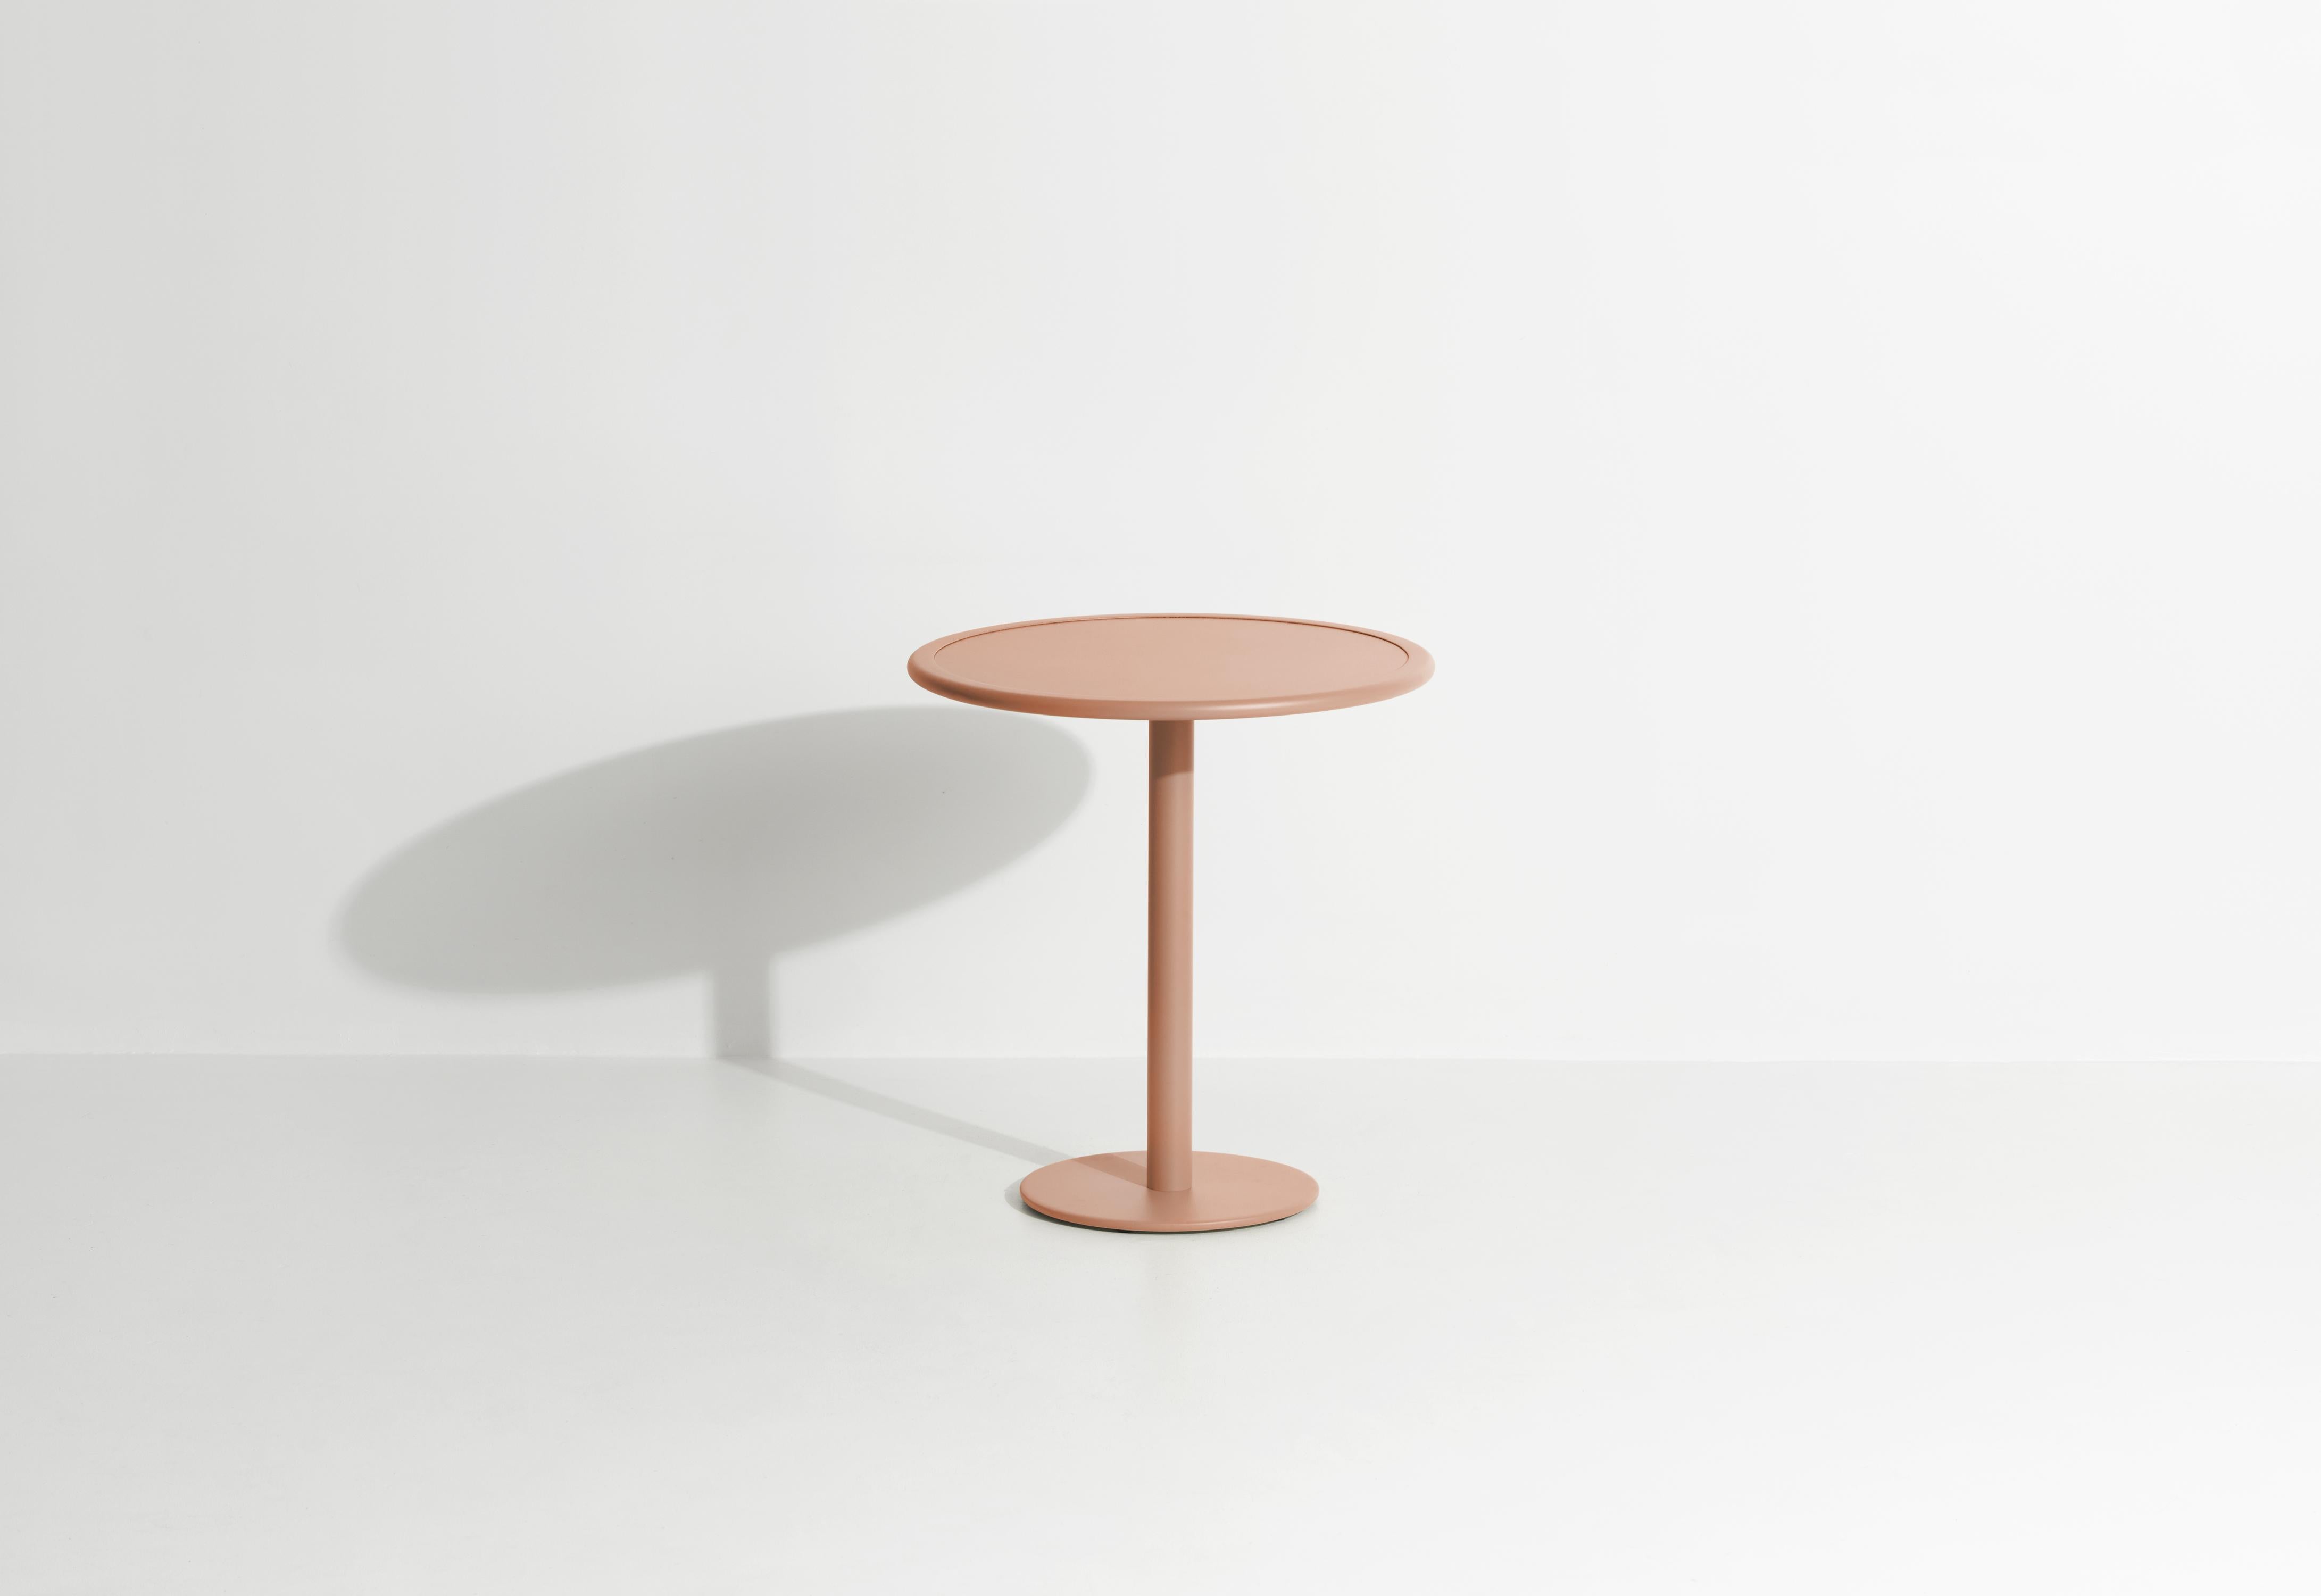 Petite Friture Week-End Bistro Round Dining Table in Blush Aluminium by Studio BrichetZiegler, 2017

The week-end collection is a full range of outdoor furniture, in aluminium grained epoxy paint, matt finish, that includes 18 functions and 8